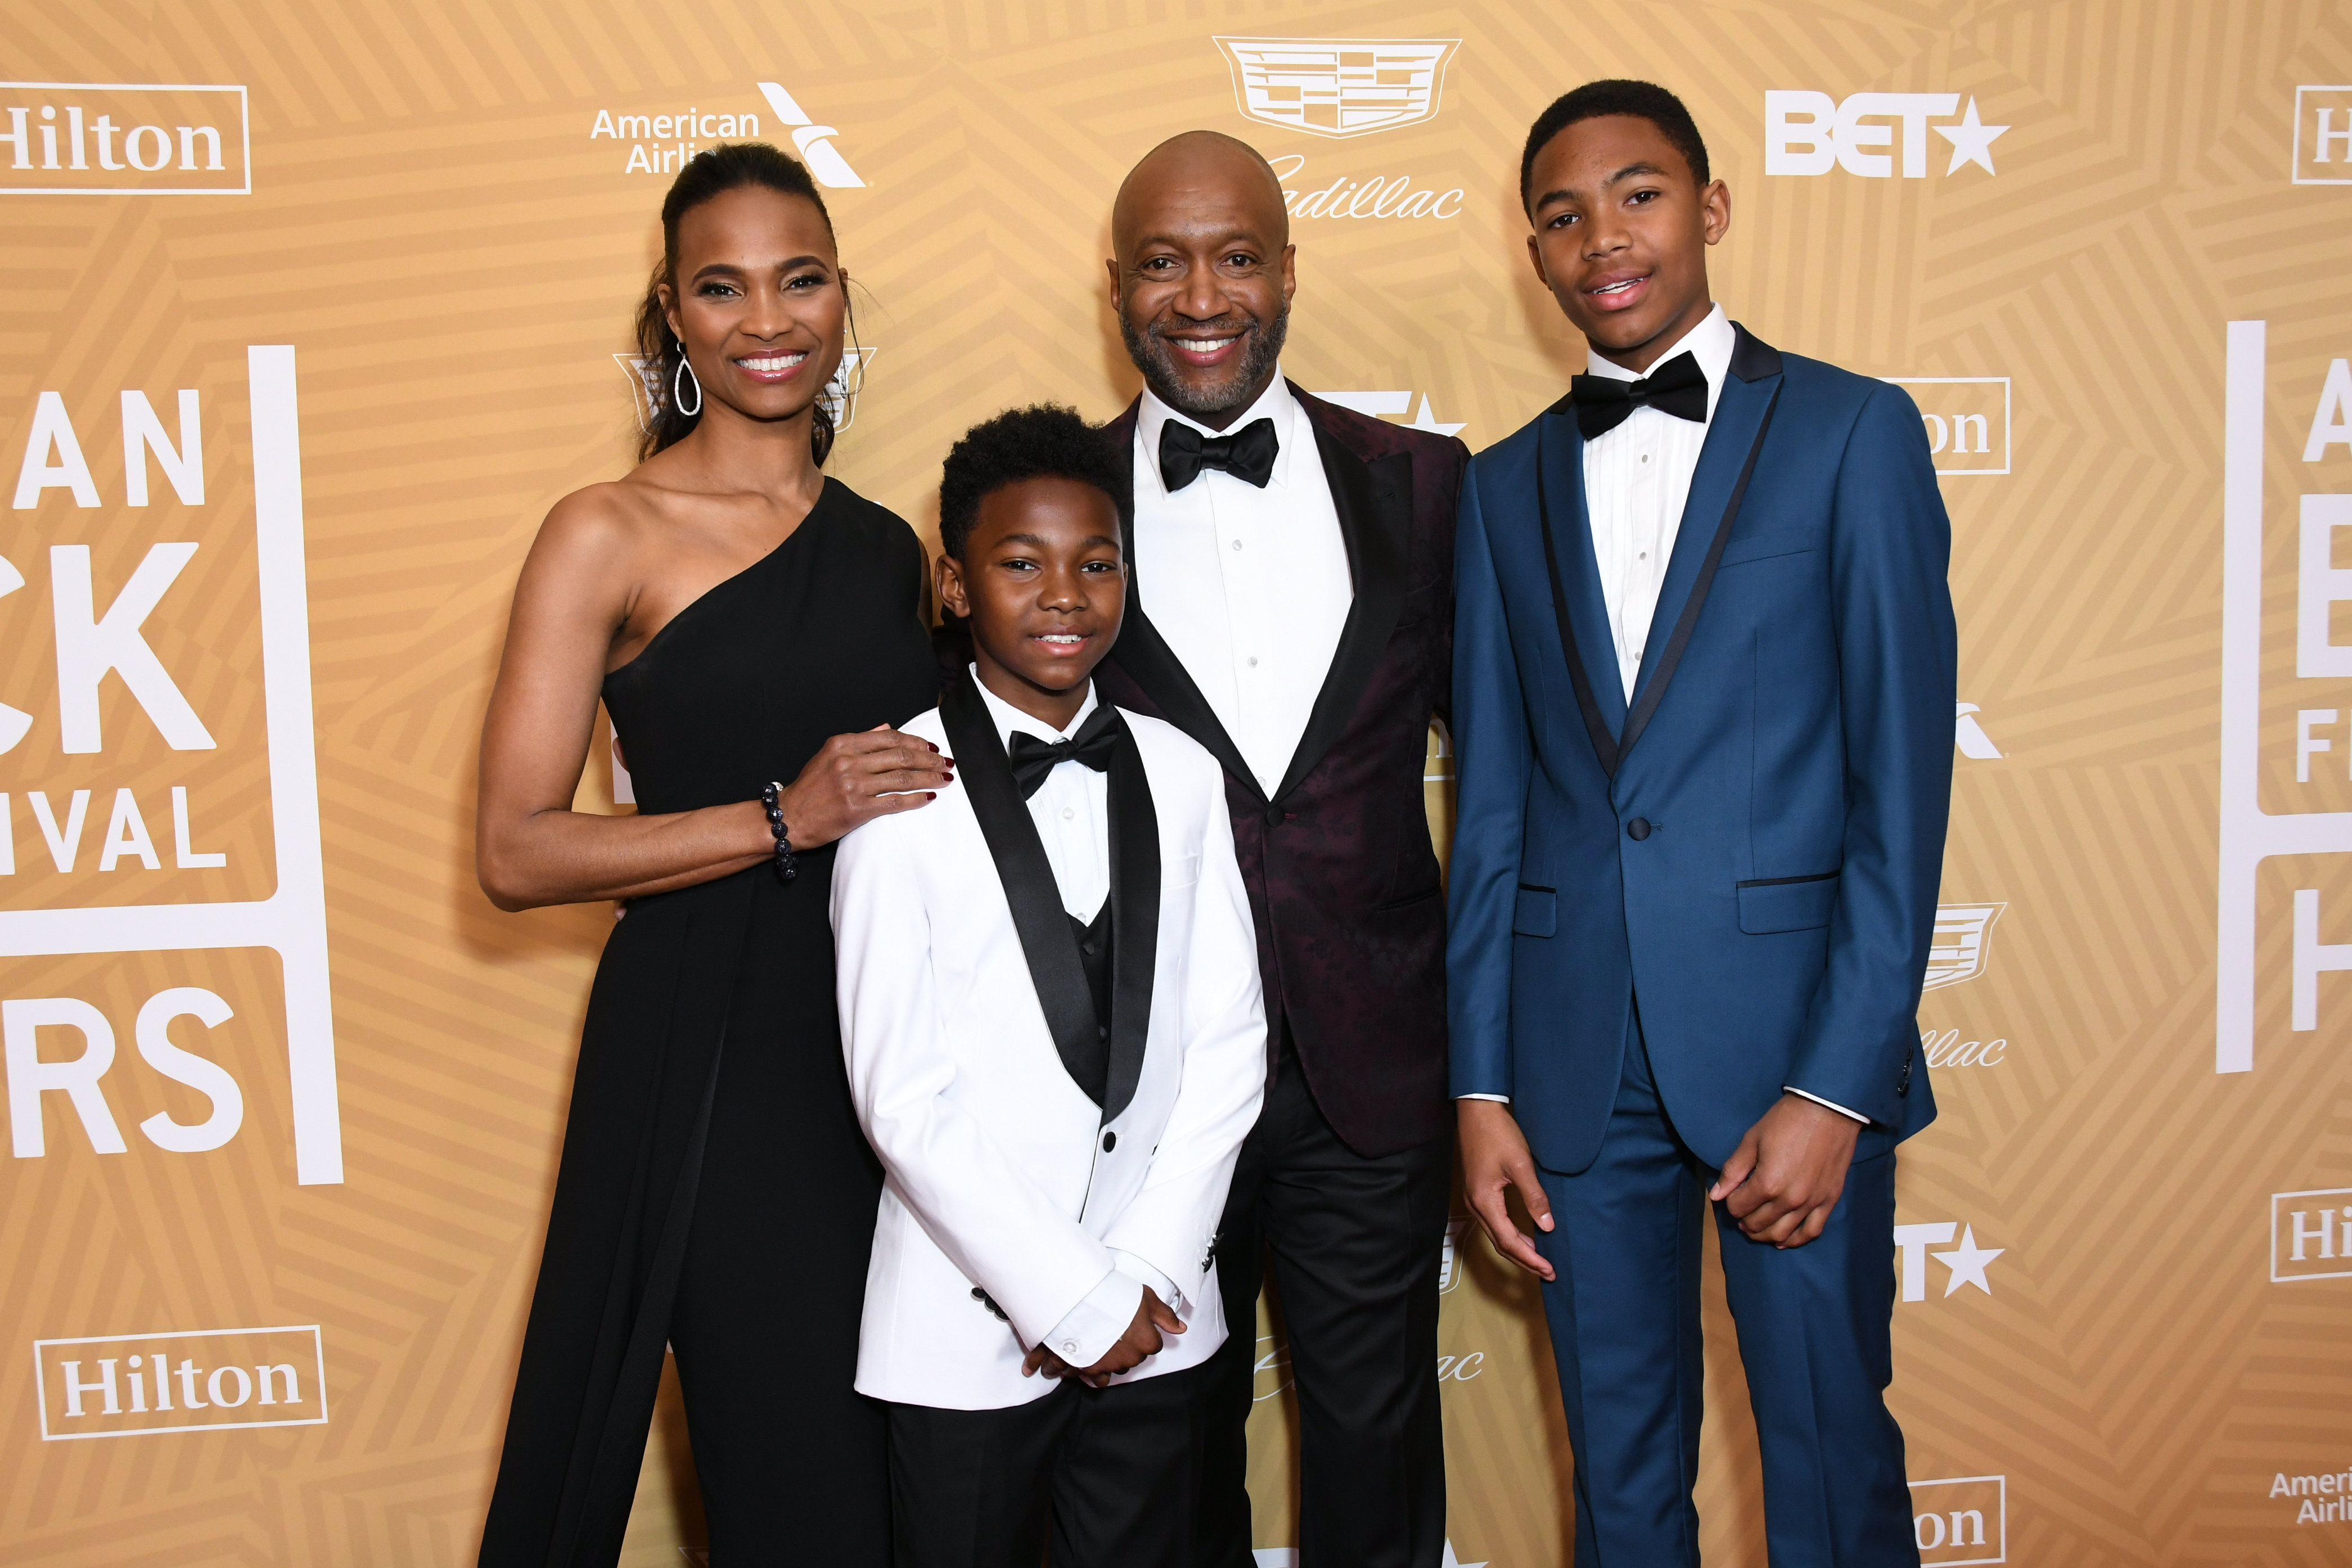 Jeff Friday Nicole Friday and their sons 4th Annual American Black Film Festival Honors Awards